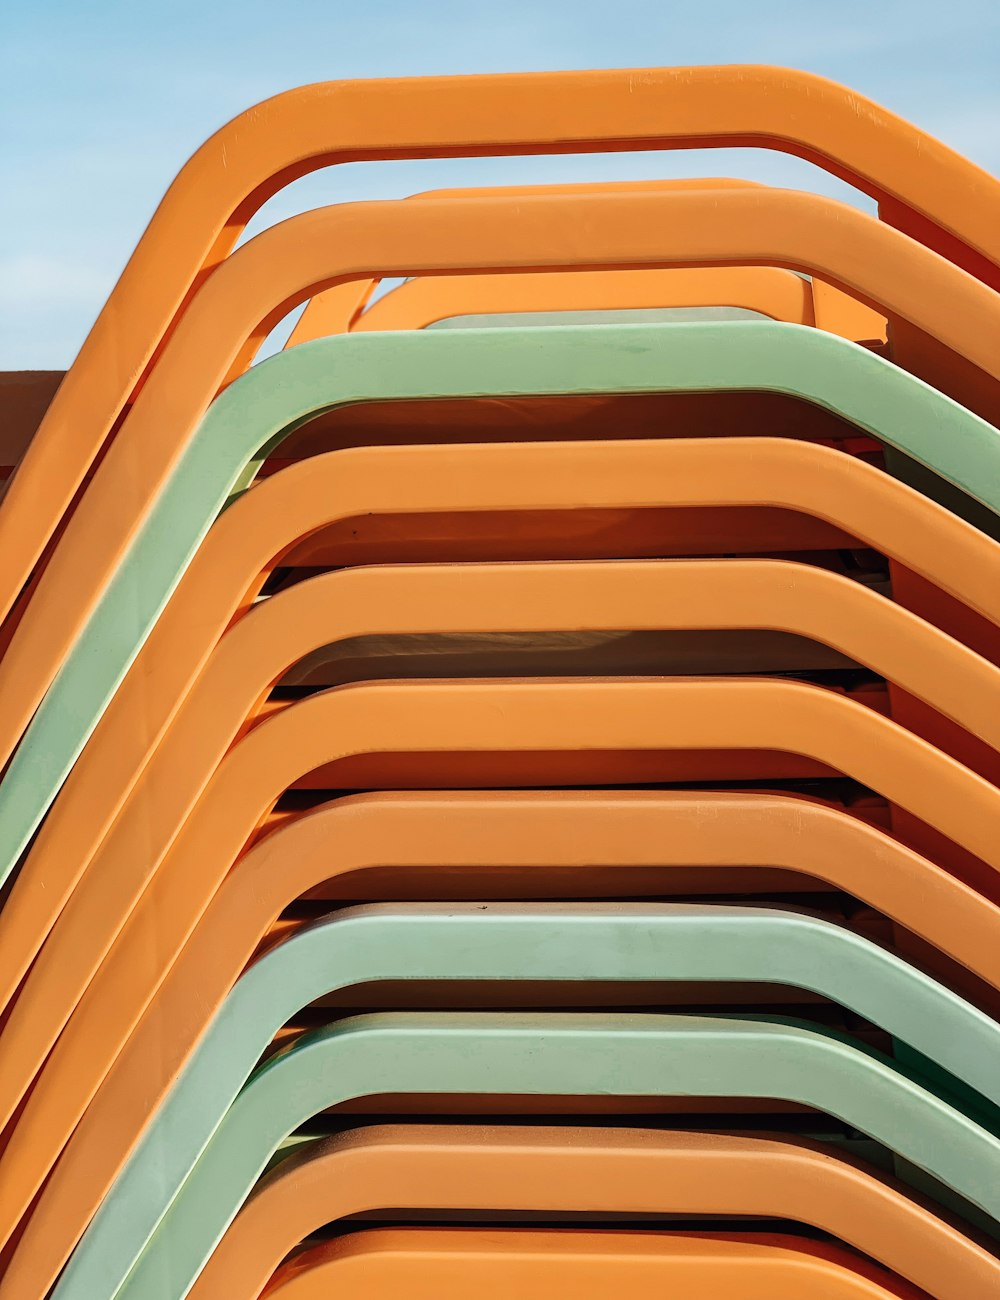 a stack of orange and green chairs against a blue sky